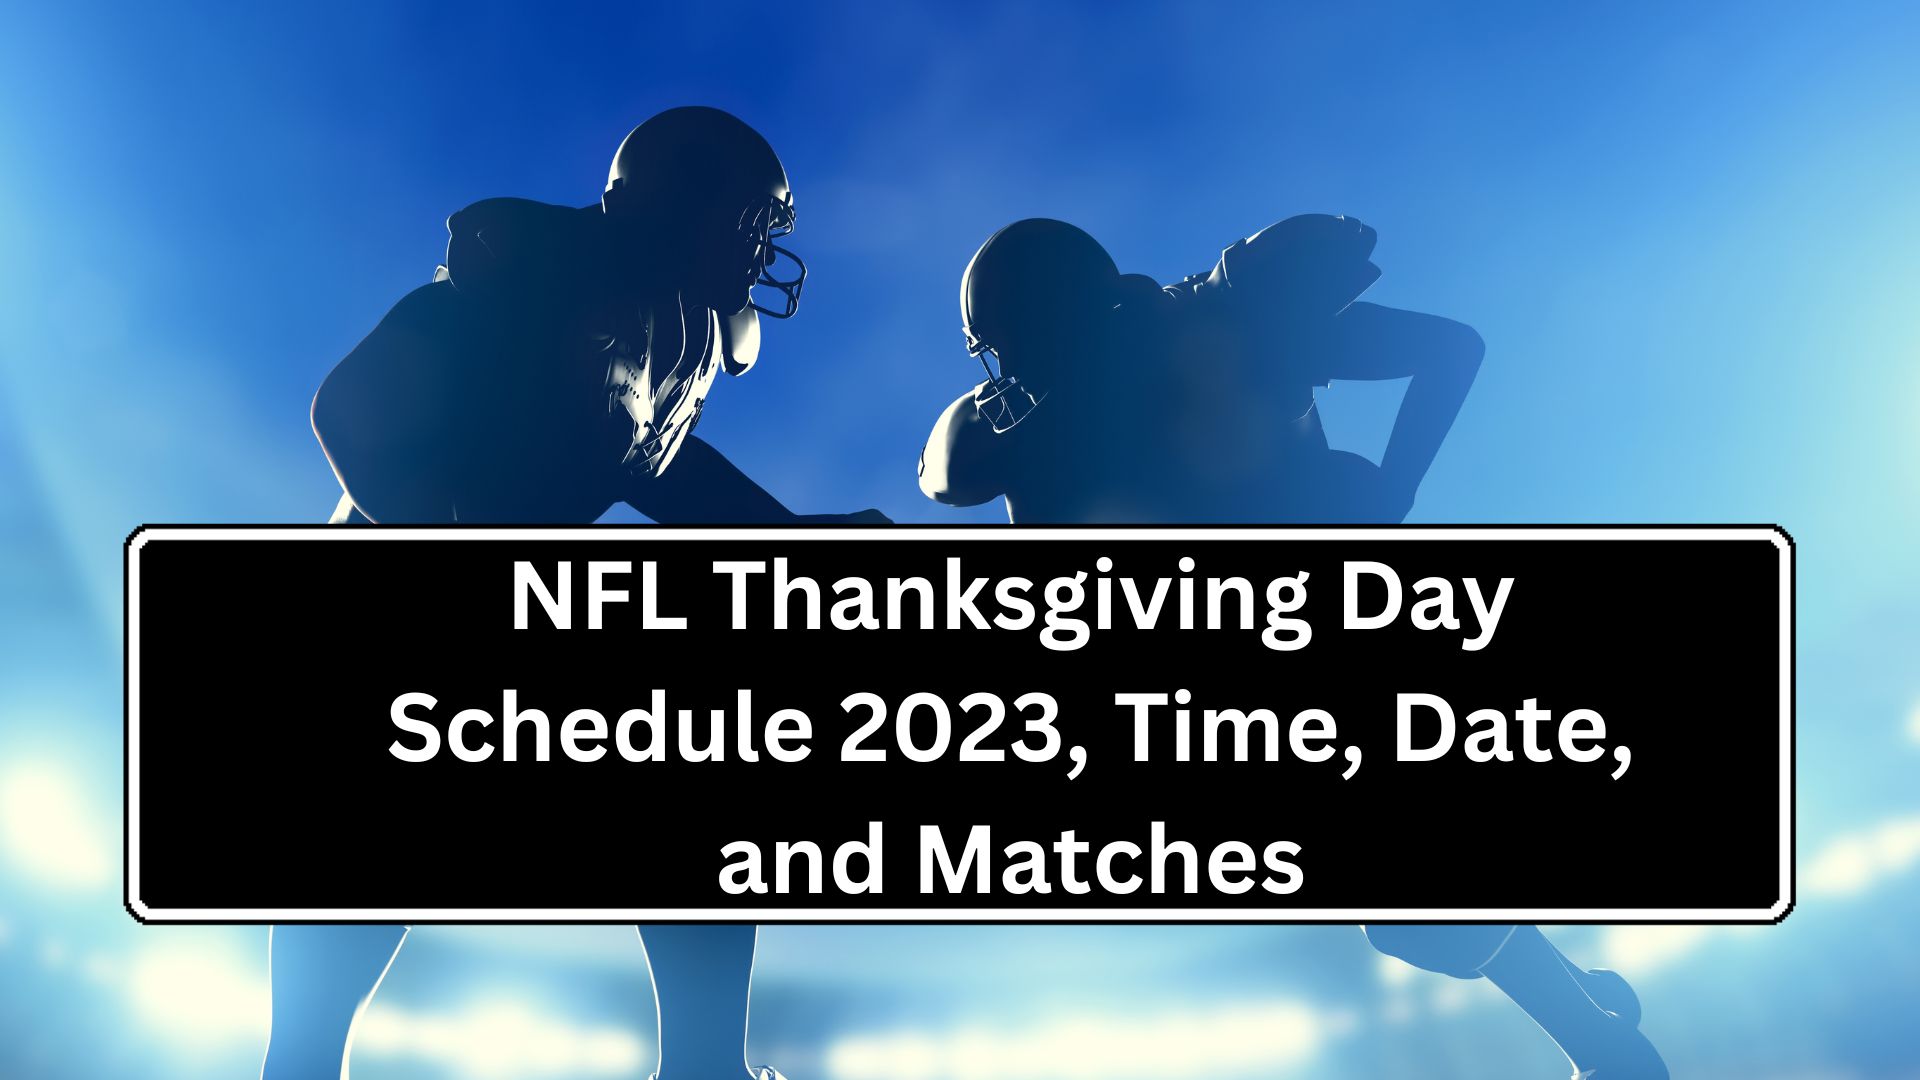 NFL Thanksgiving Day Schedule 2023, Time, Date, and Matches